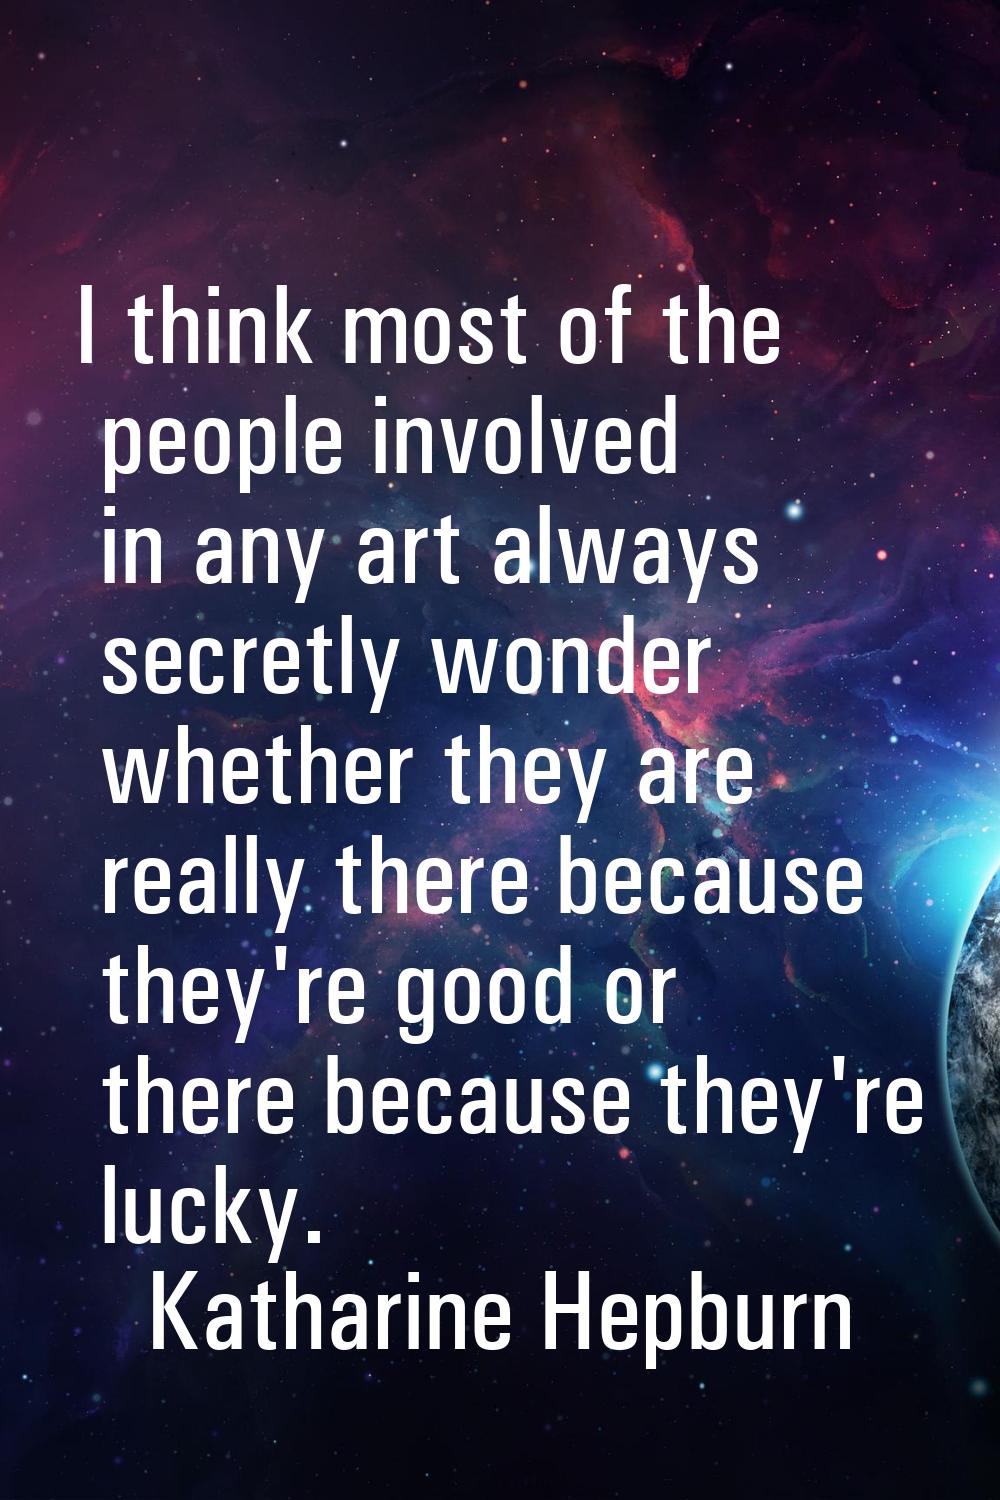 I think most of the people involved in any art always secretly wonder whether they are really there